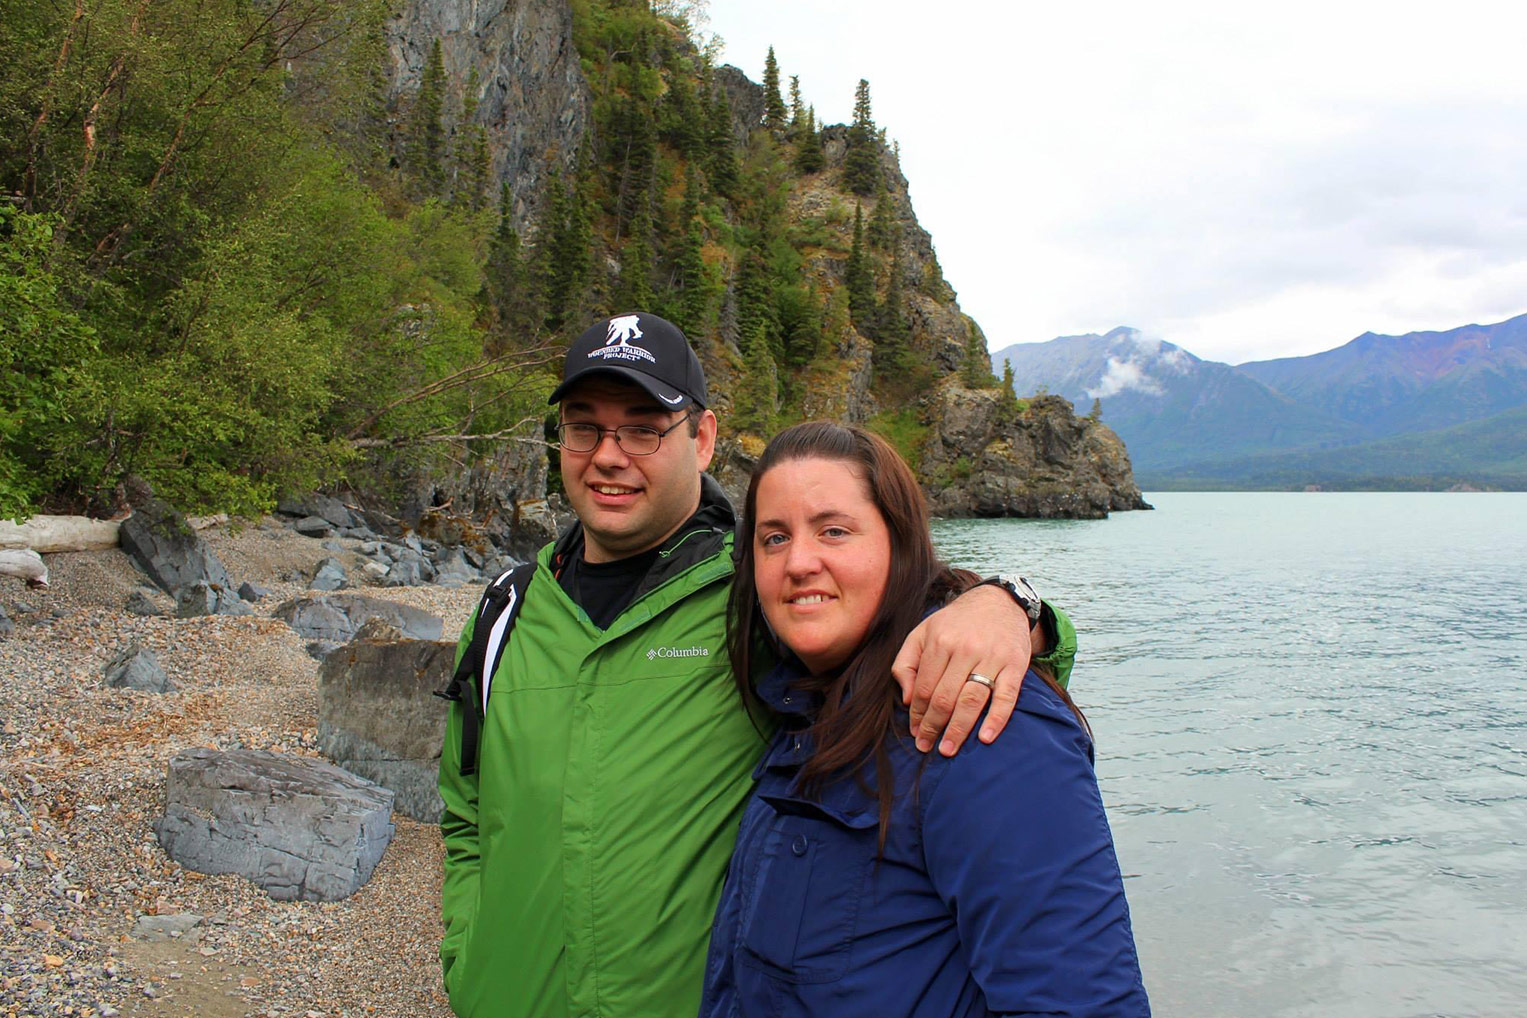 Petey and Kyra Beam came to Alaska with their marriage on the rocks and without a clear path forward.